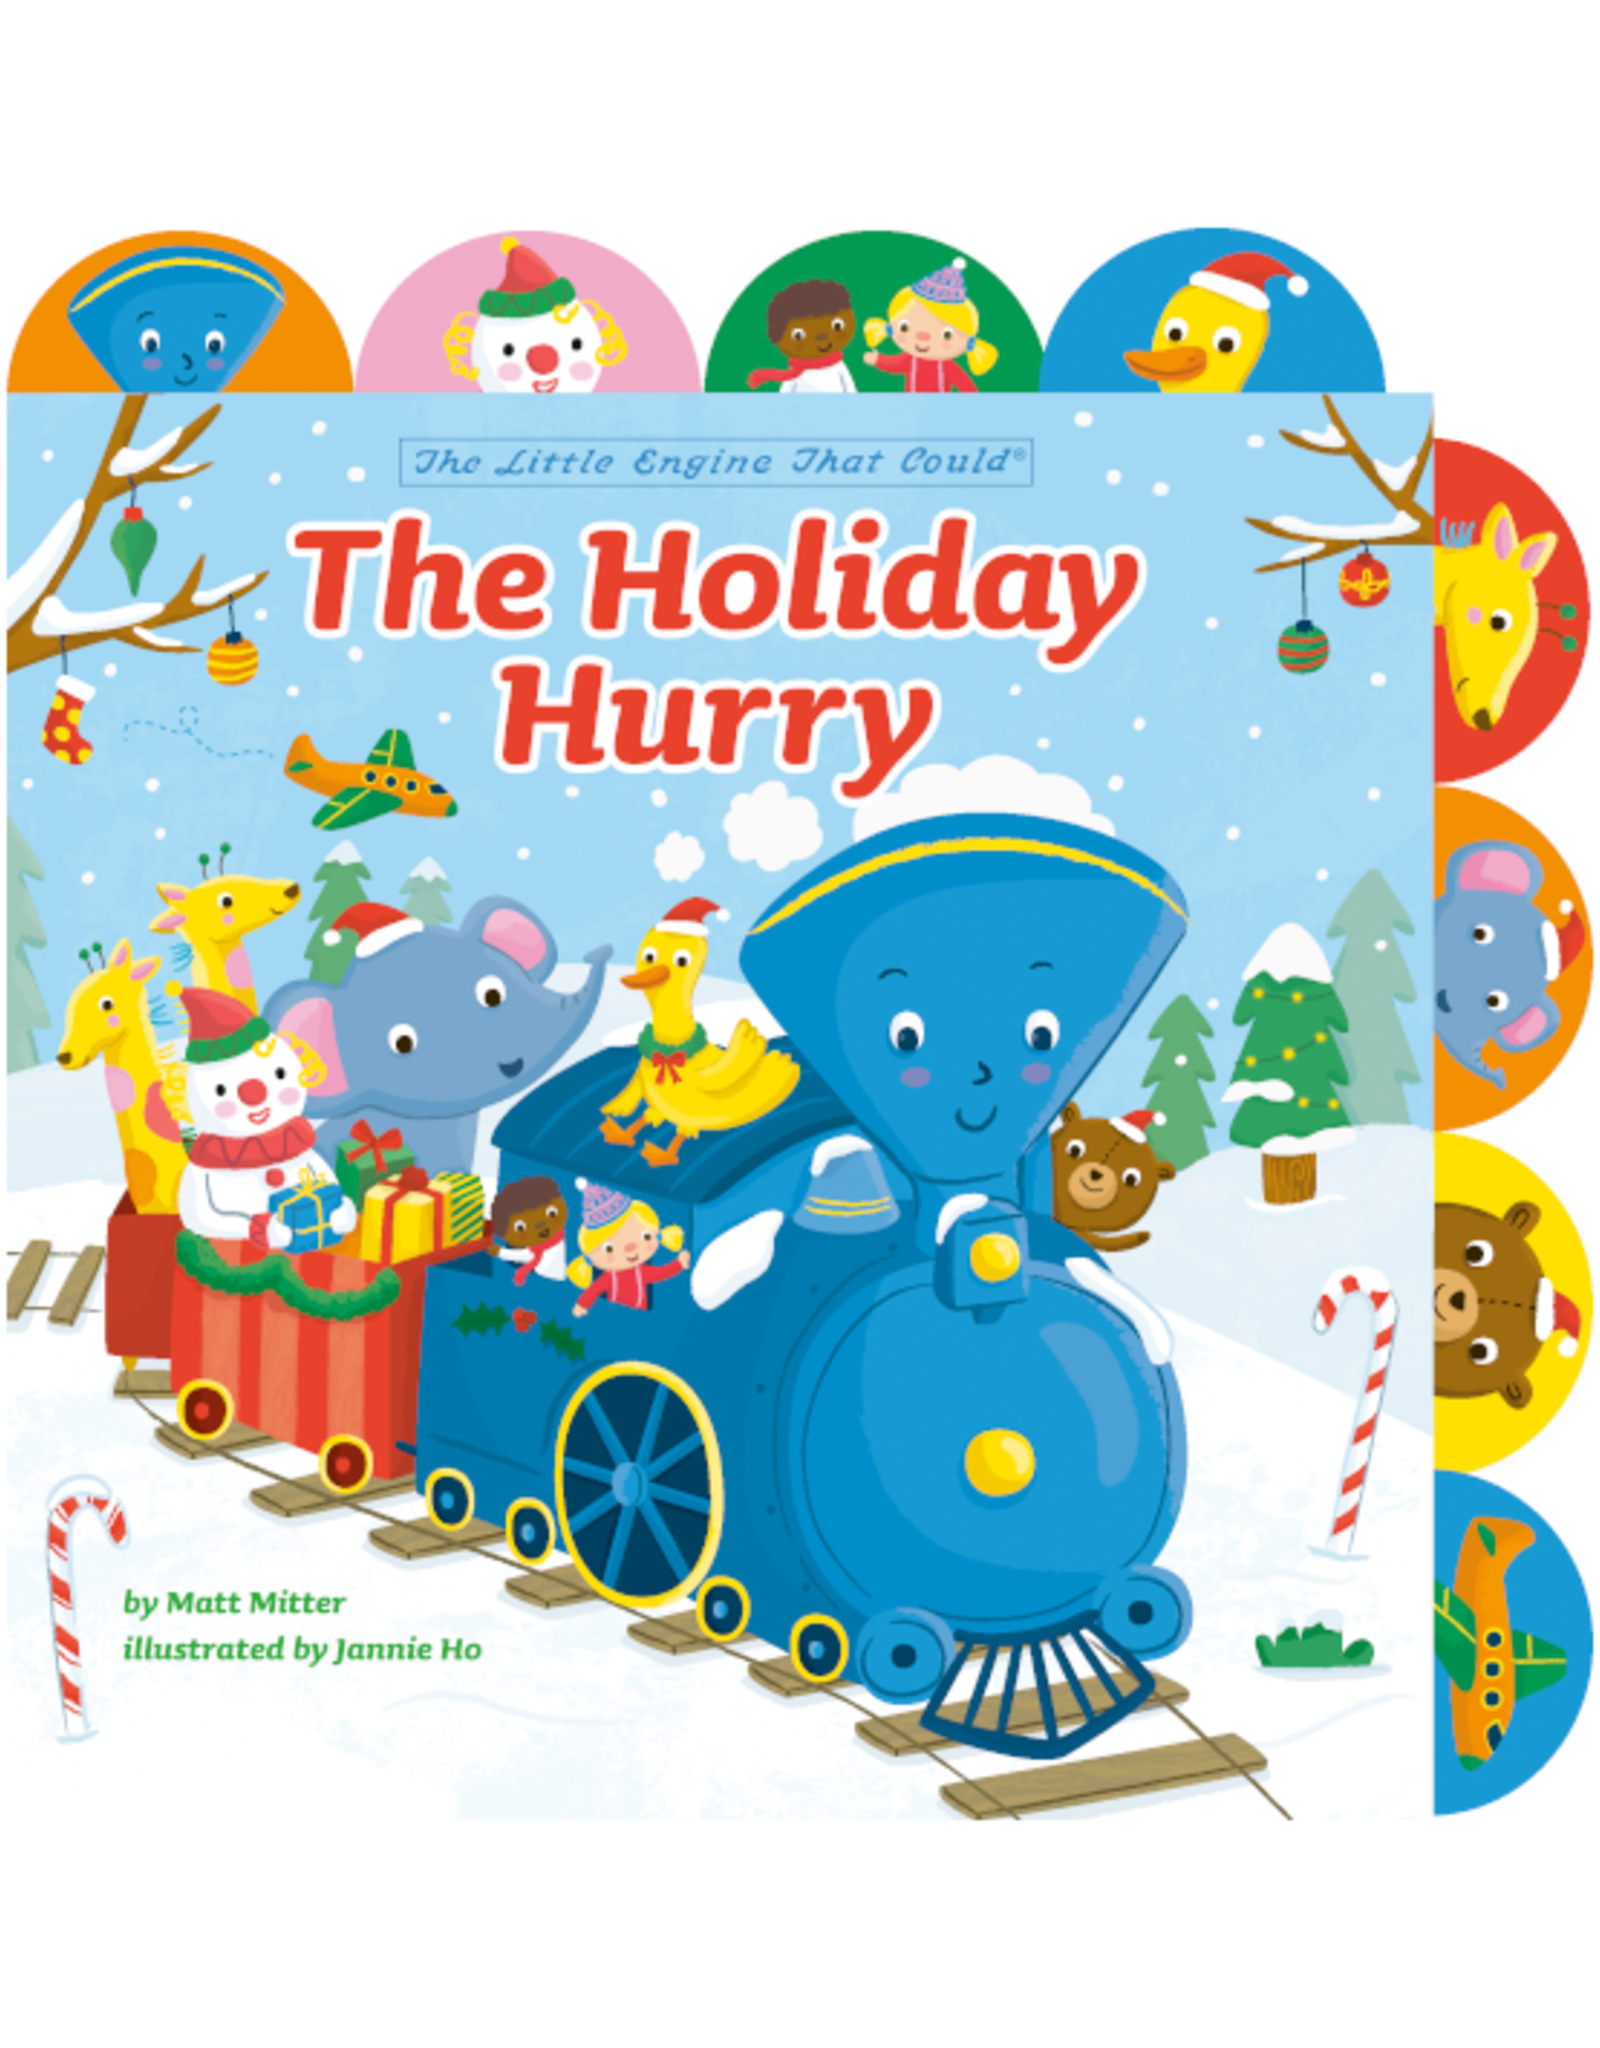 Book - The Holiday Hurry